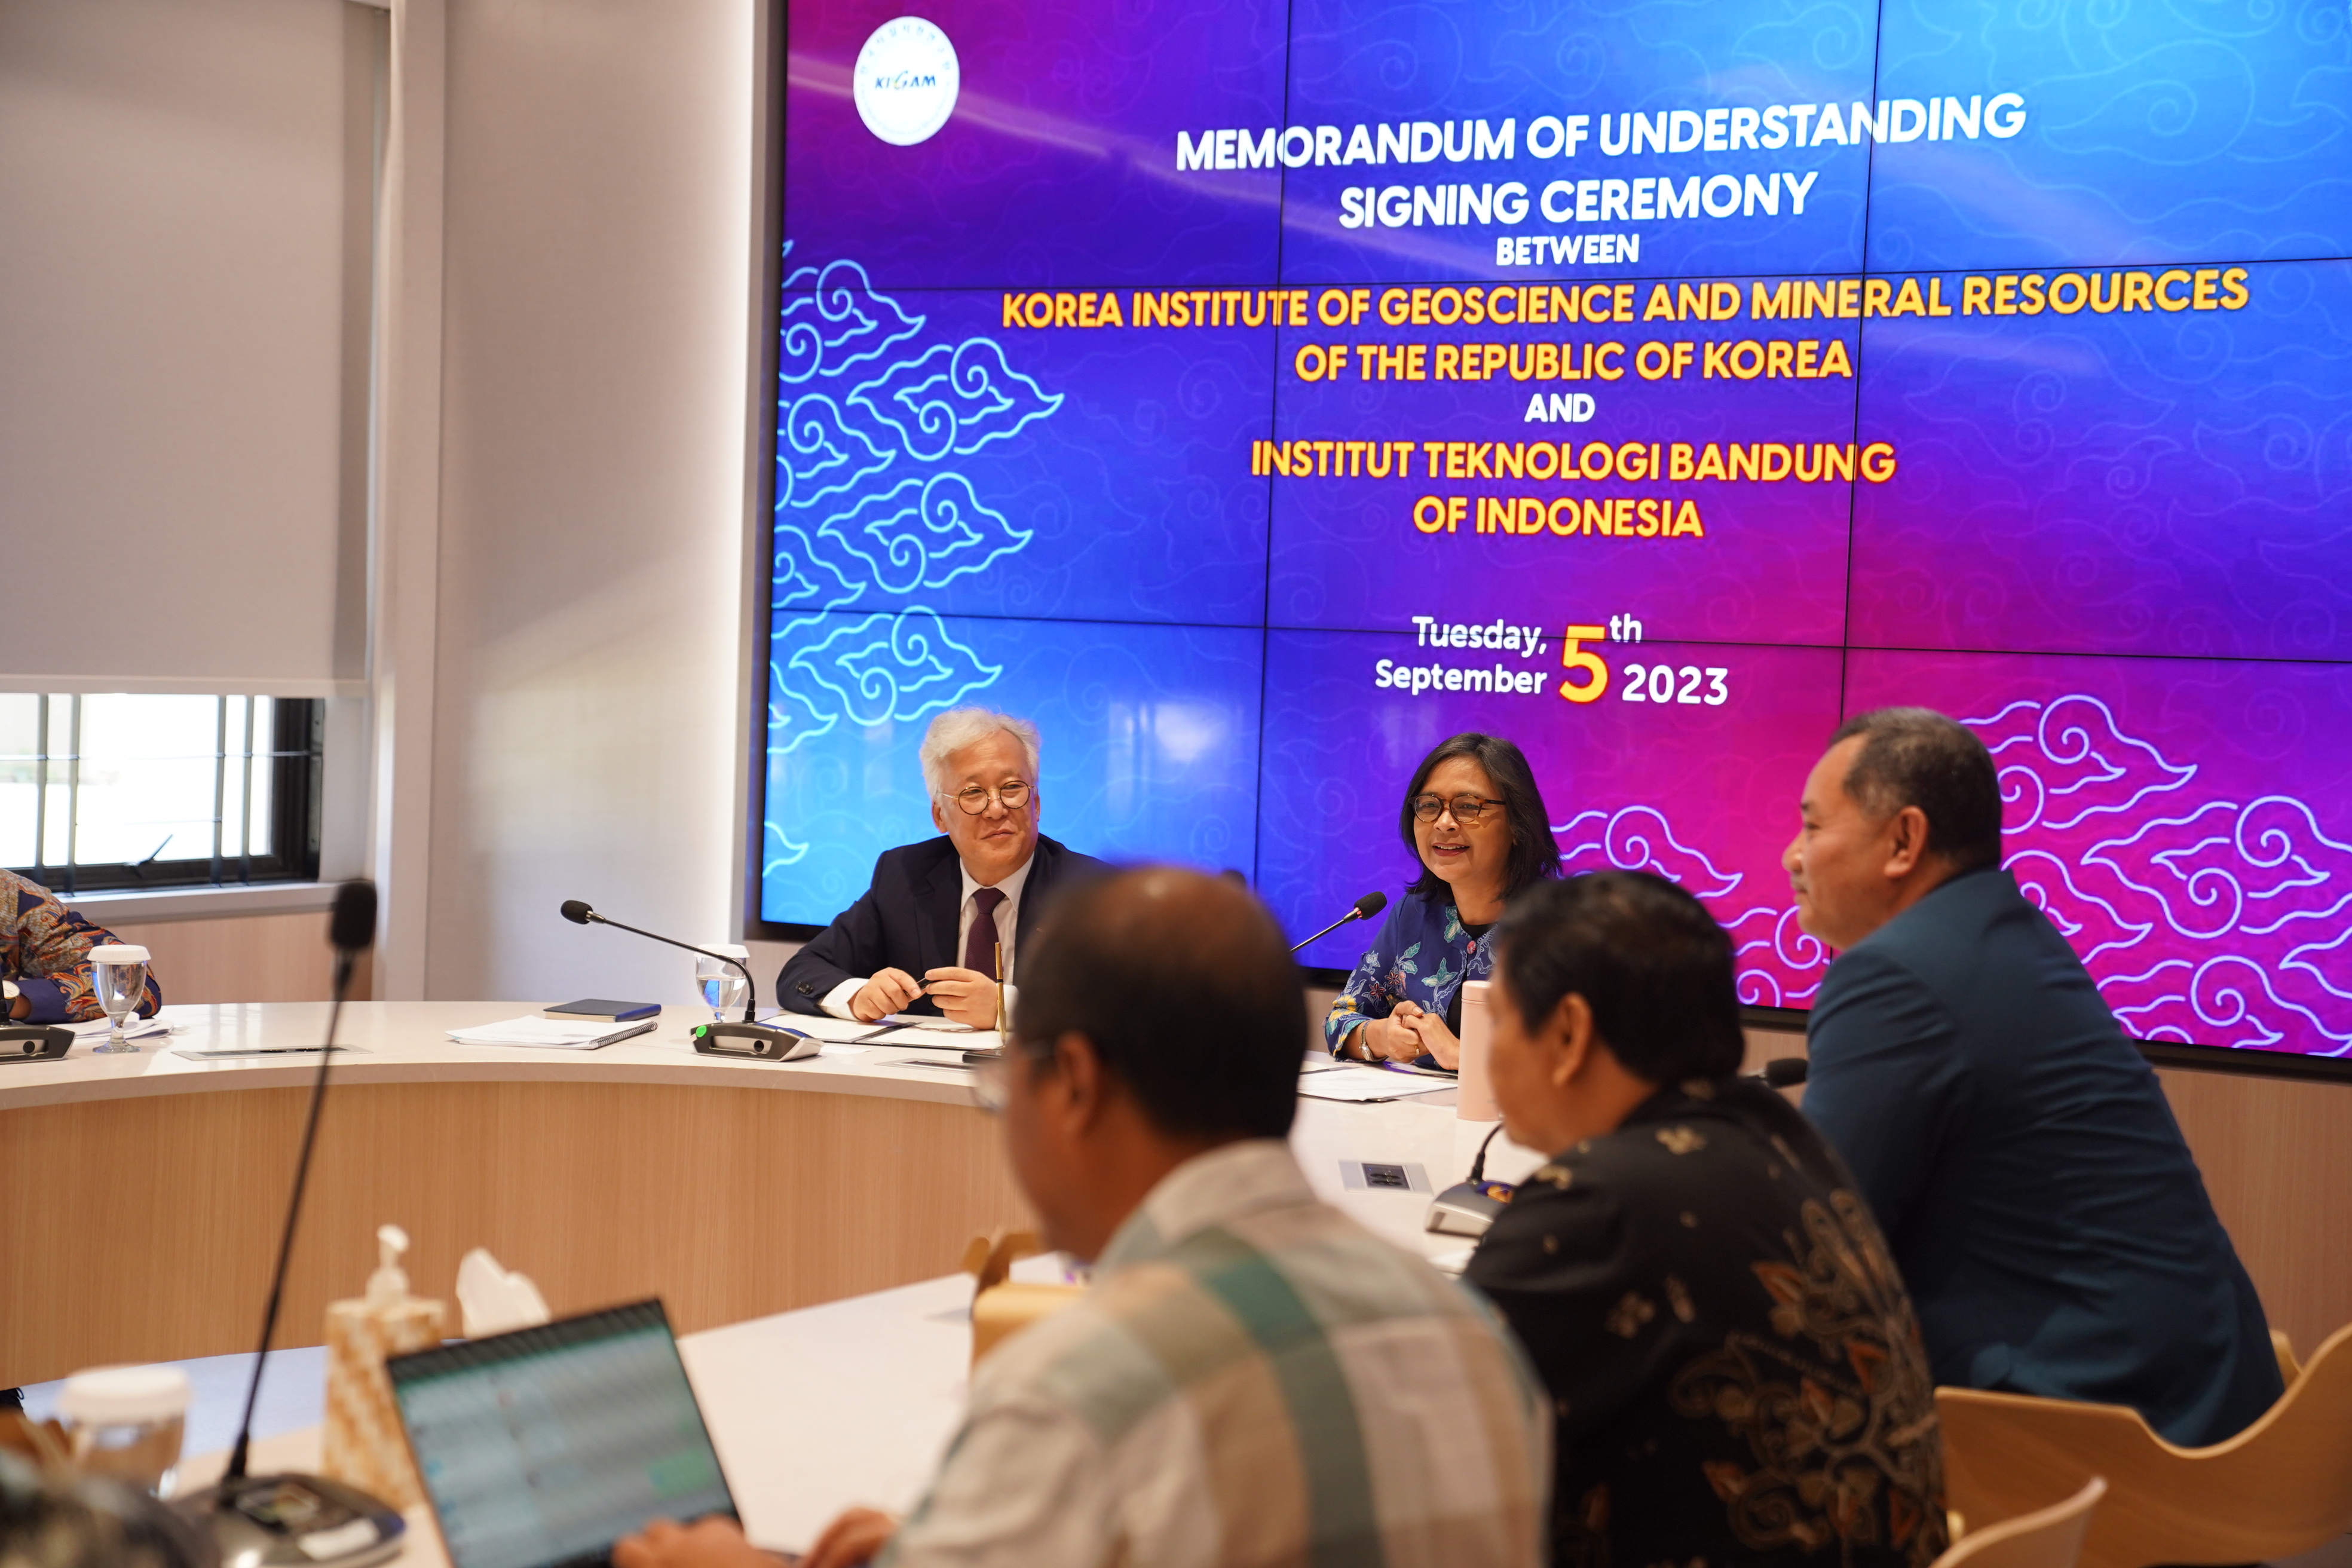 itb-and-kigam-sign-mou-for-mineral-resources-research-collaboration-and-establishment-of-joint-research-center